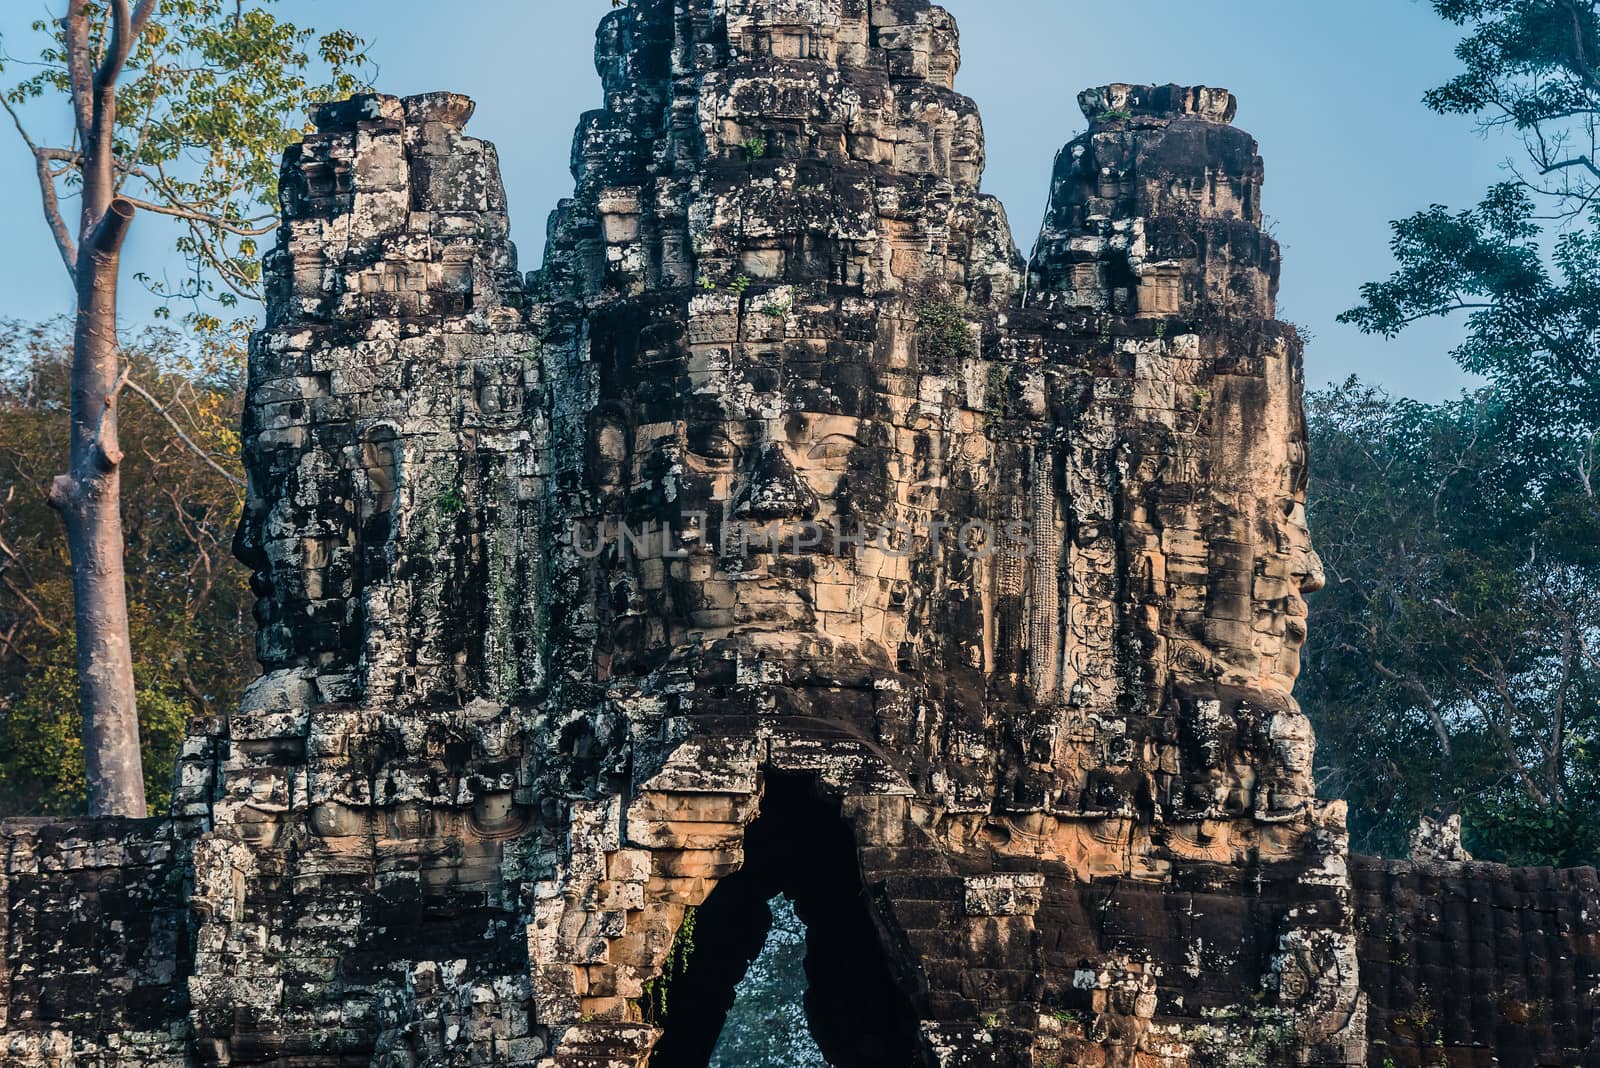 giant face south gate bridge angkor thom cambodia  by PIXSTILL